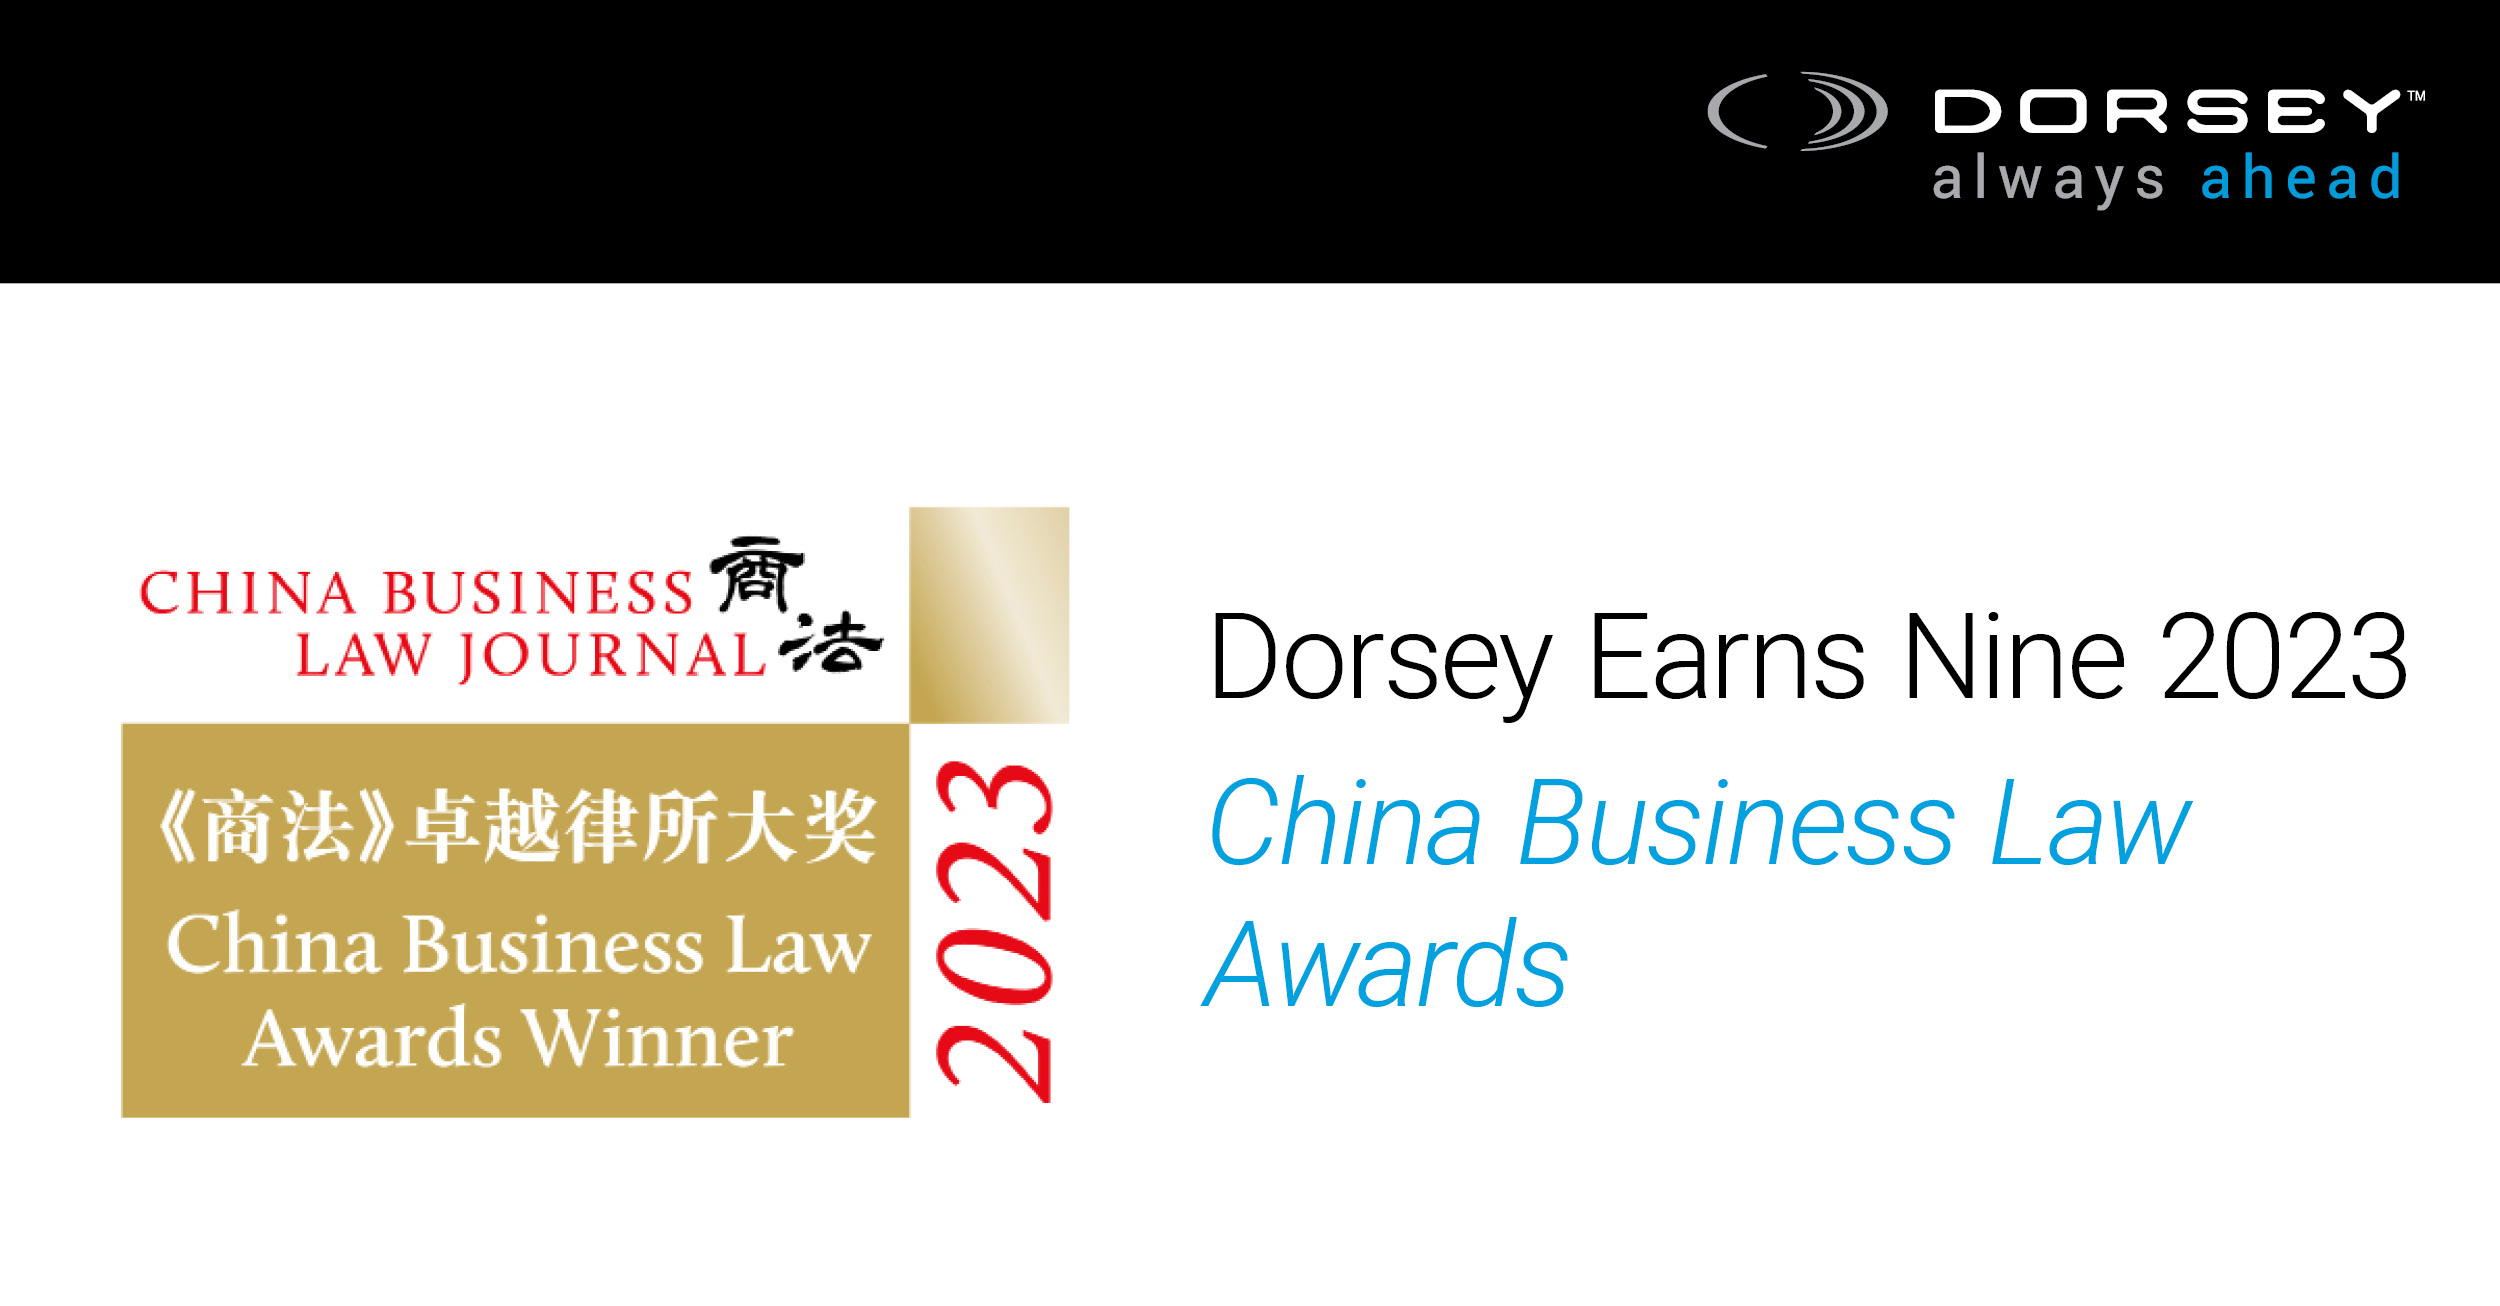 China Business Law Awards